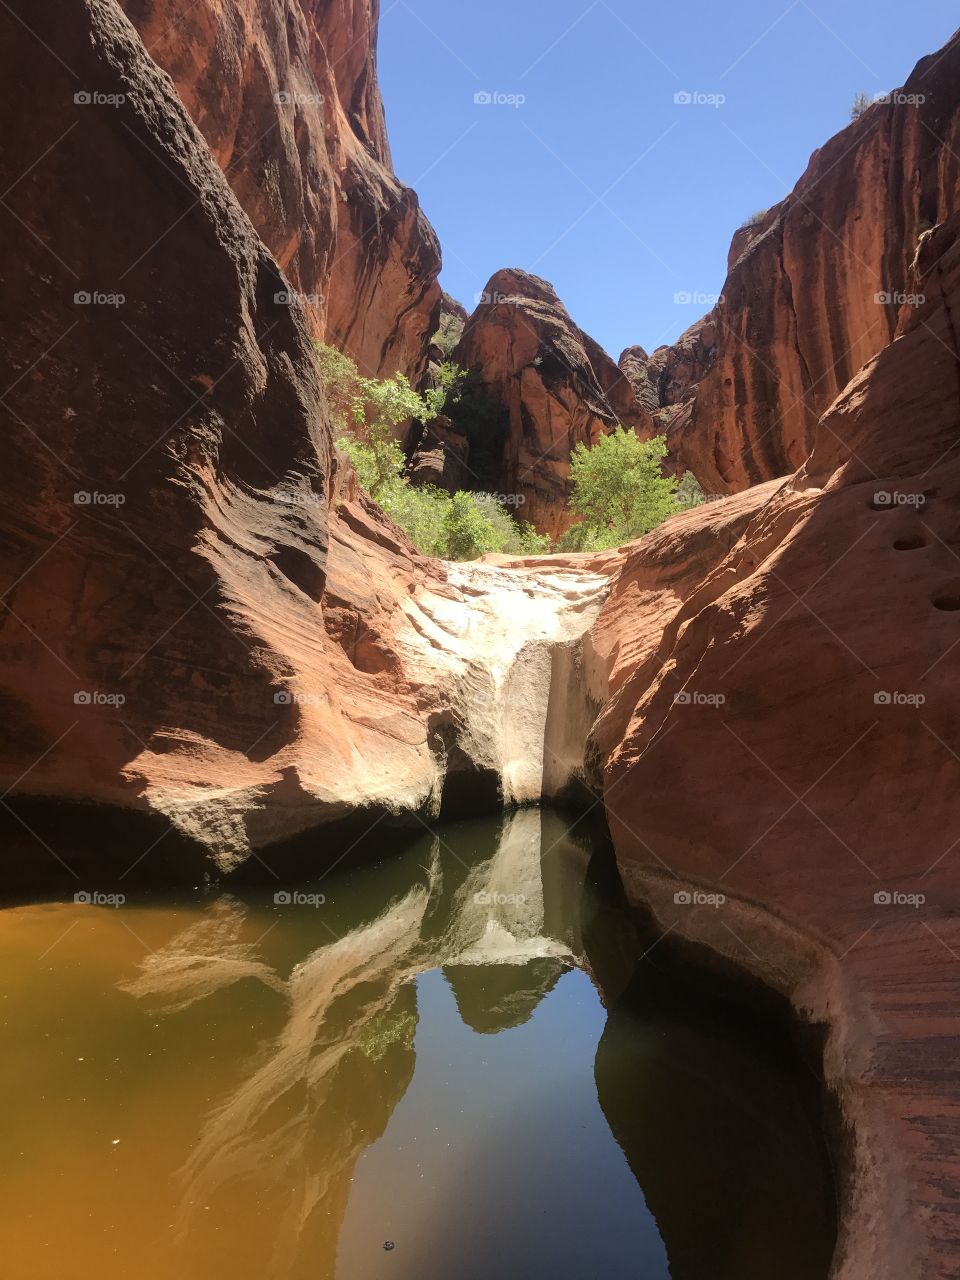 Waters and reflections in red rocks